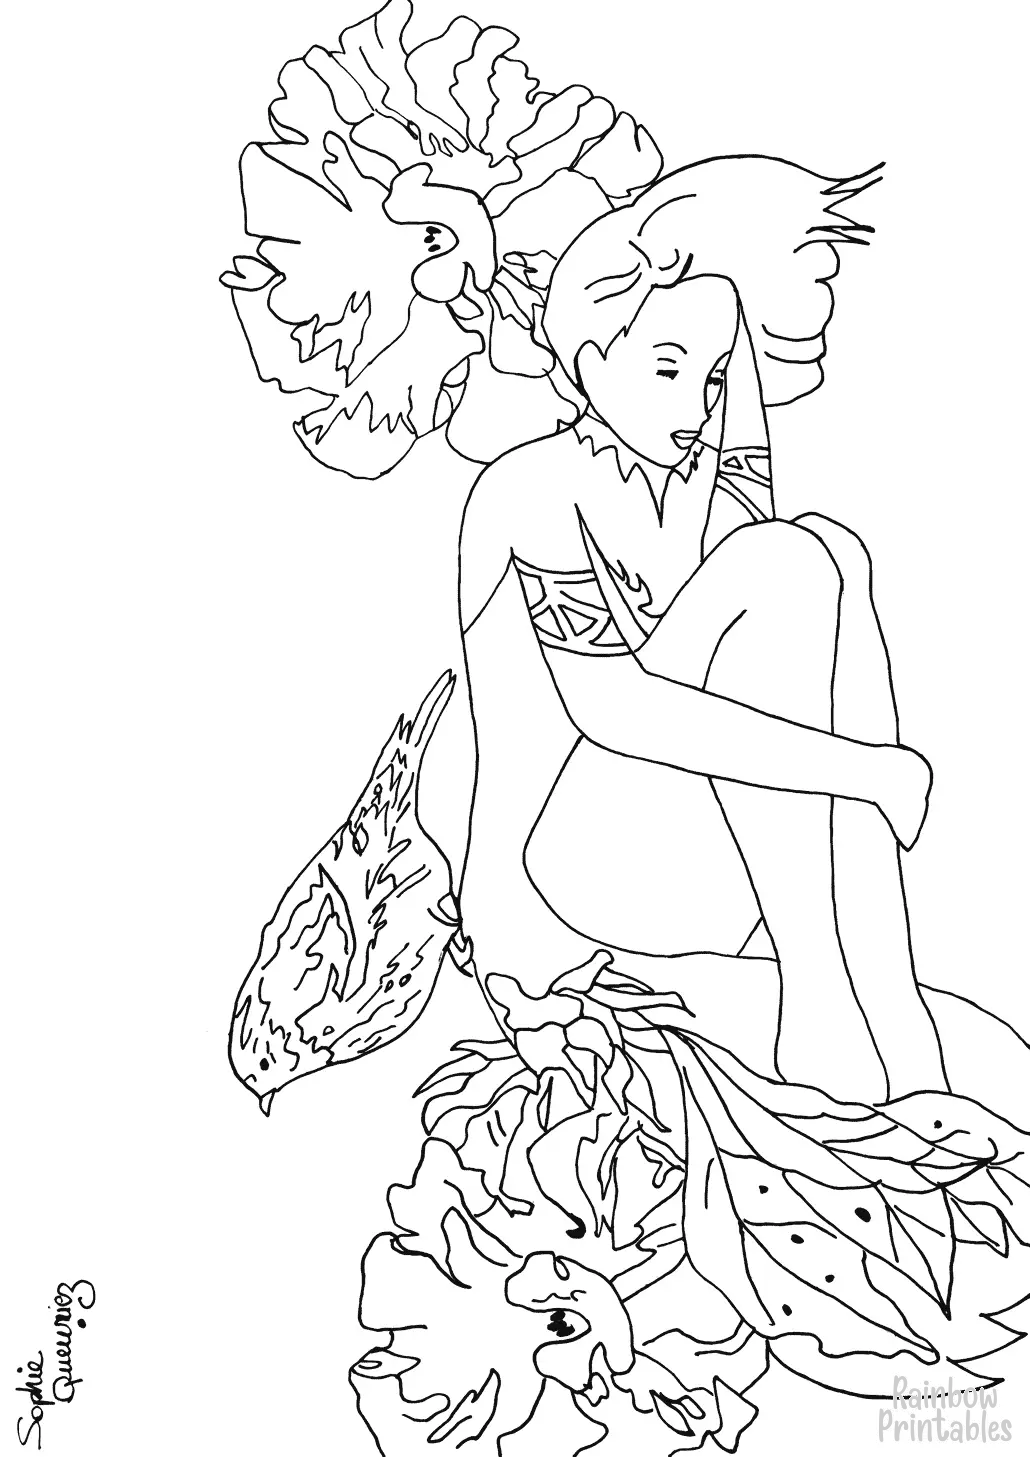 WOMAN WITH BIRD FLOWERS Girl Free Clipart Coloring Pages for Kids Adults Art Activities Line Art